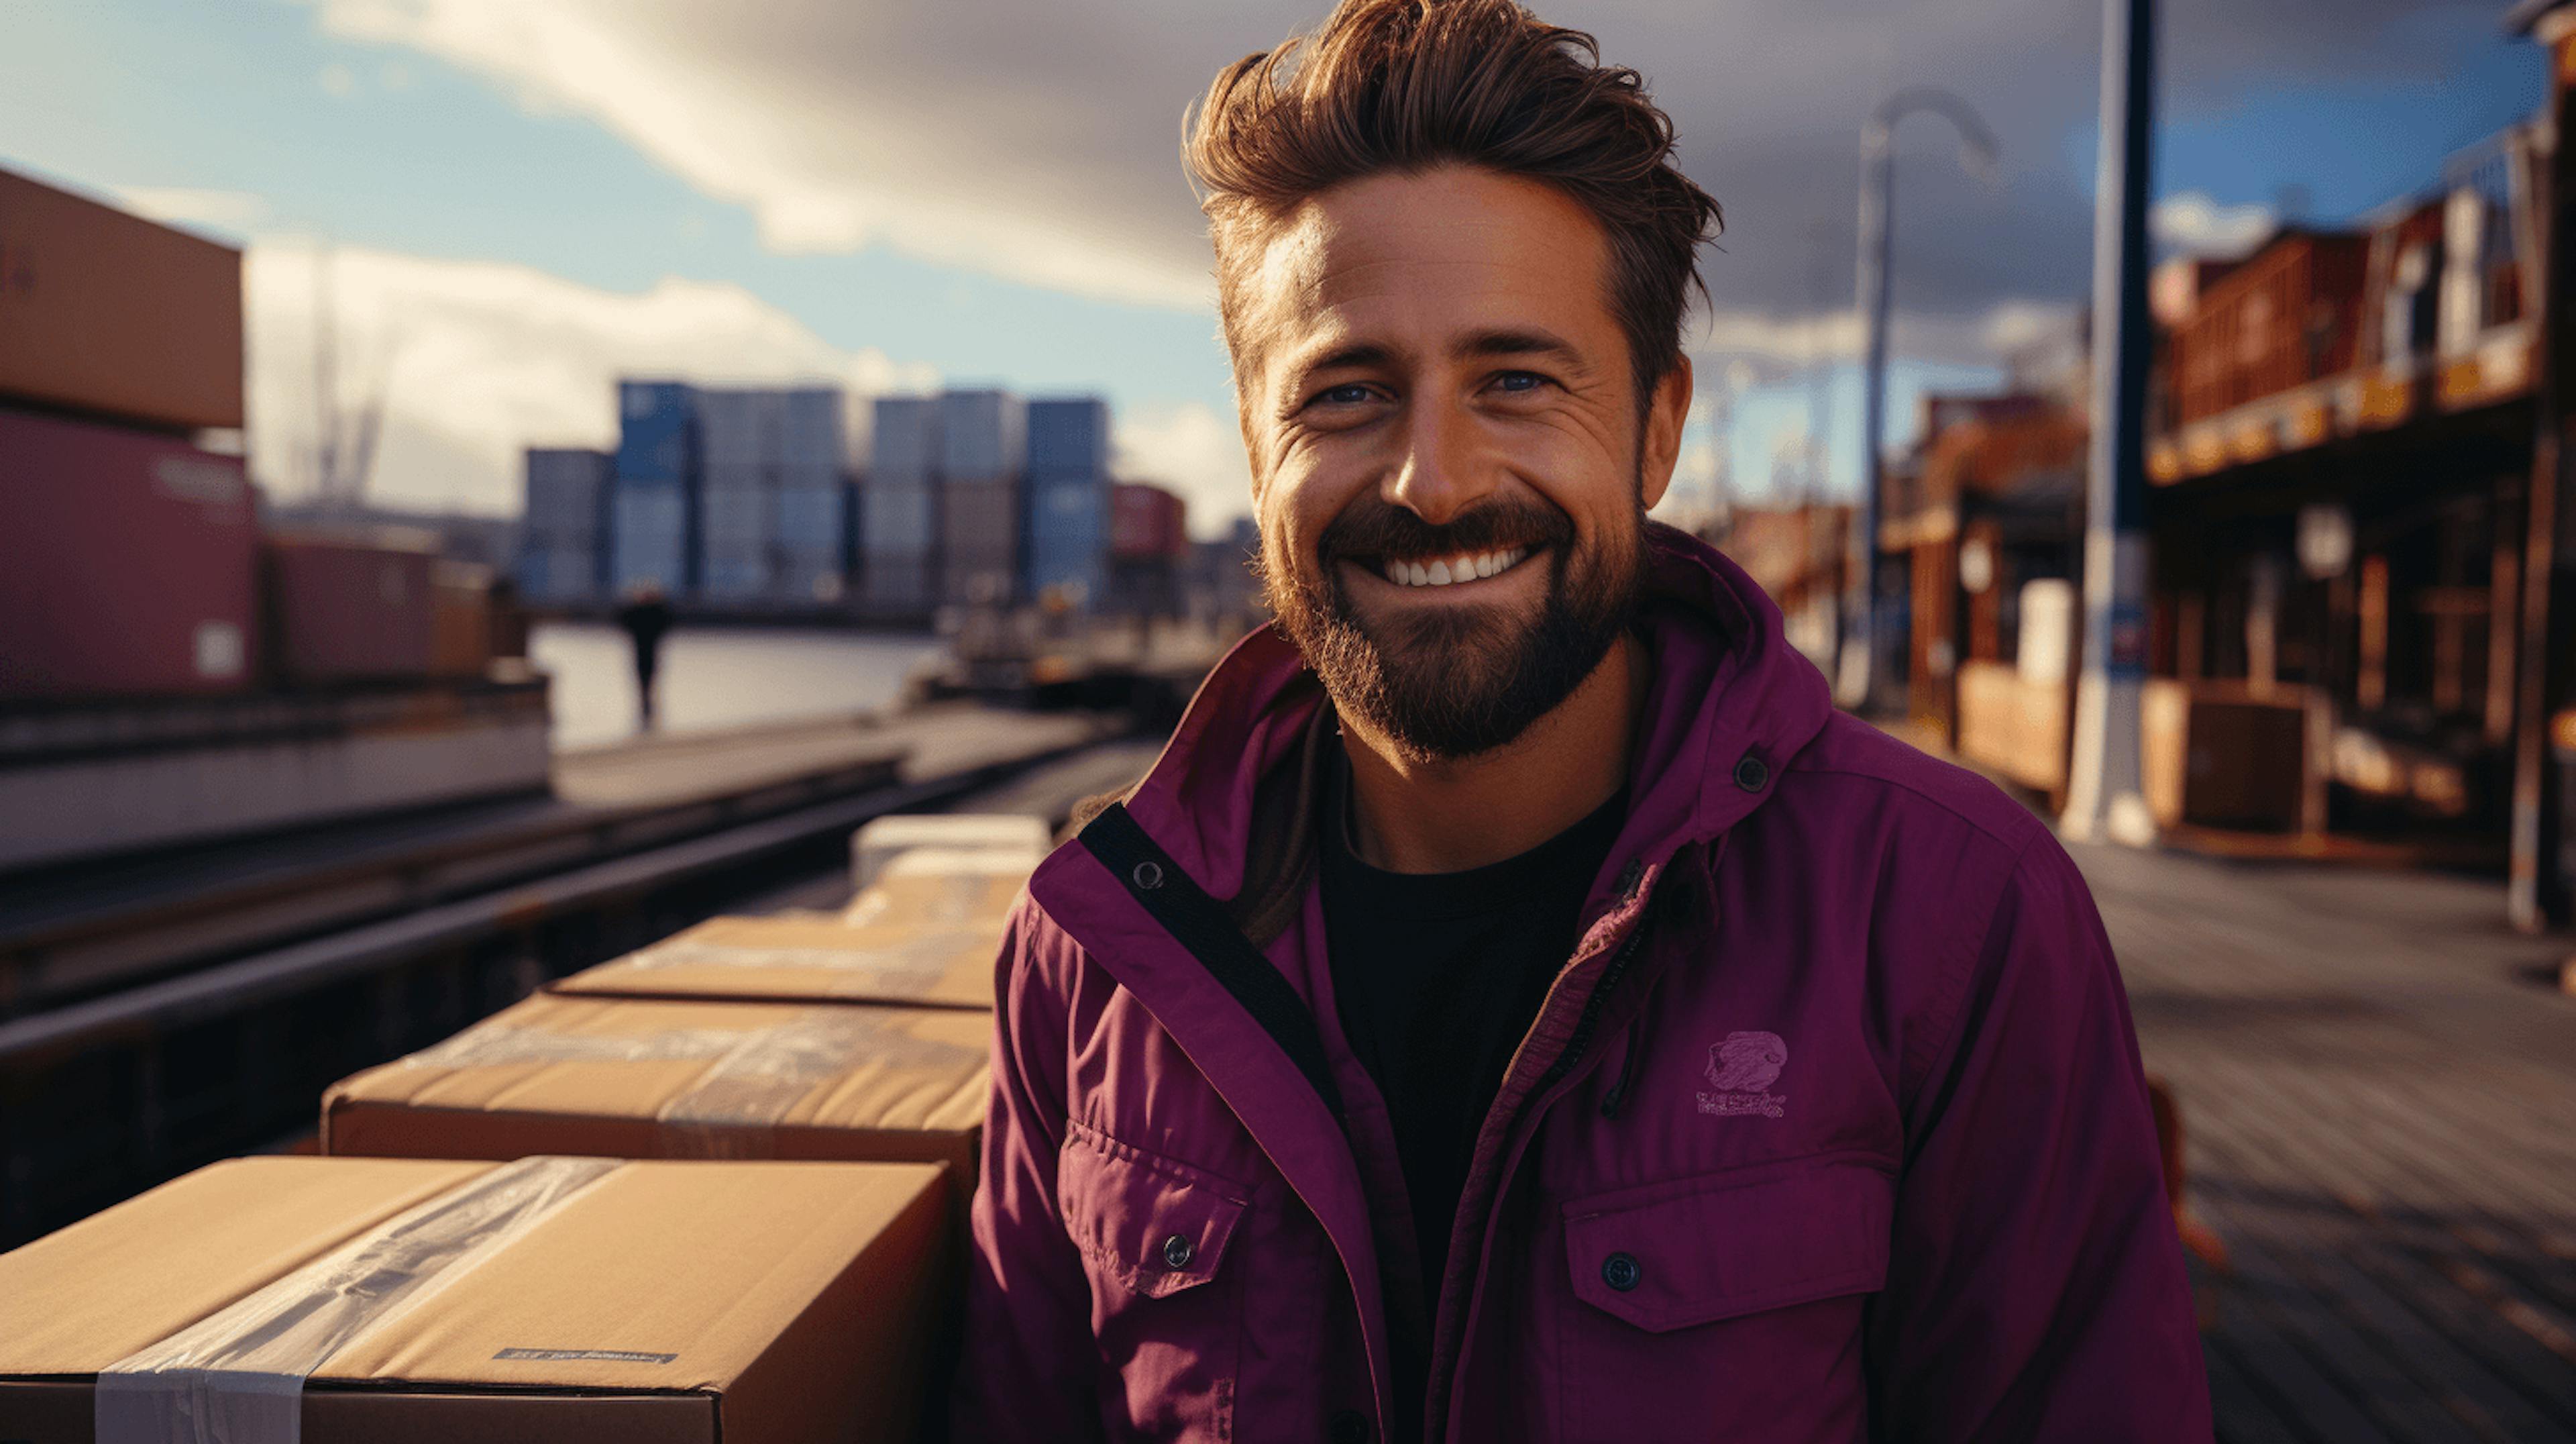 a man with a beard smiling next to a train and some boxes, in the style of captivating harbor views